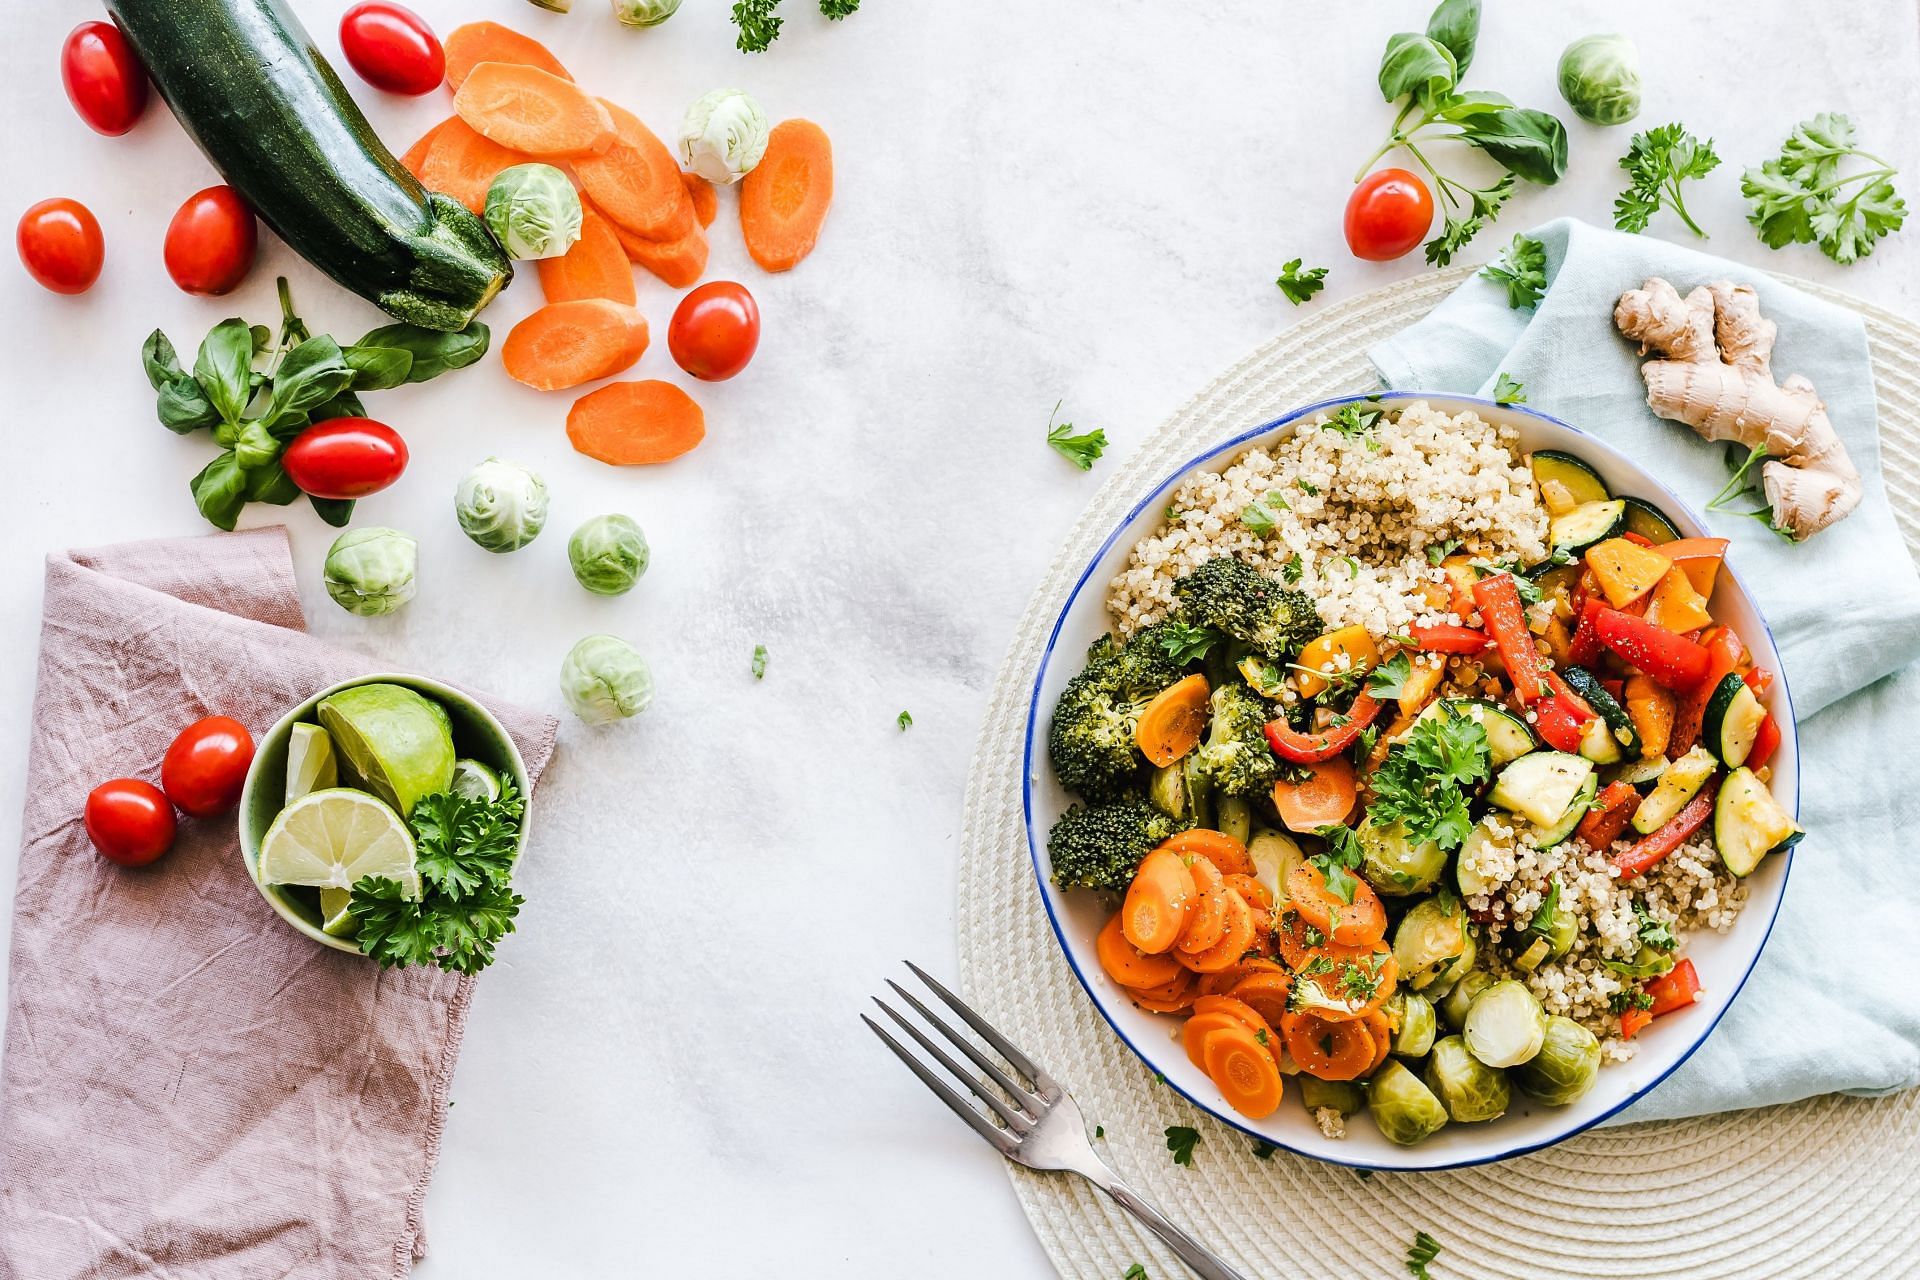 A healthy outside starts from the inside (image via pexels)